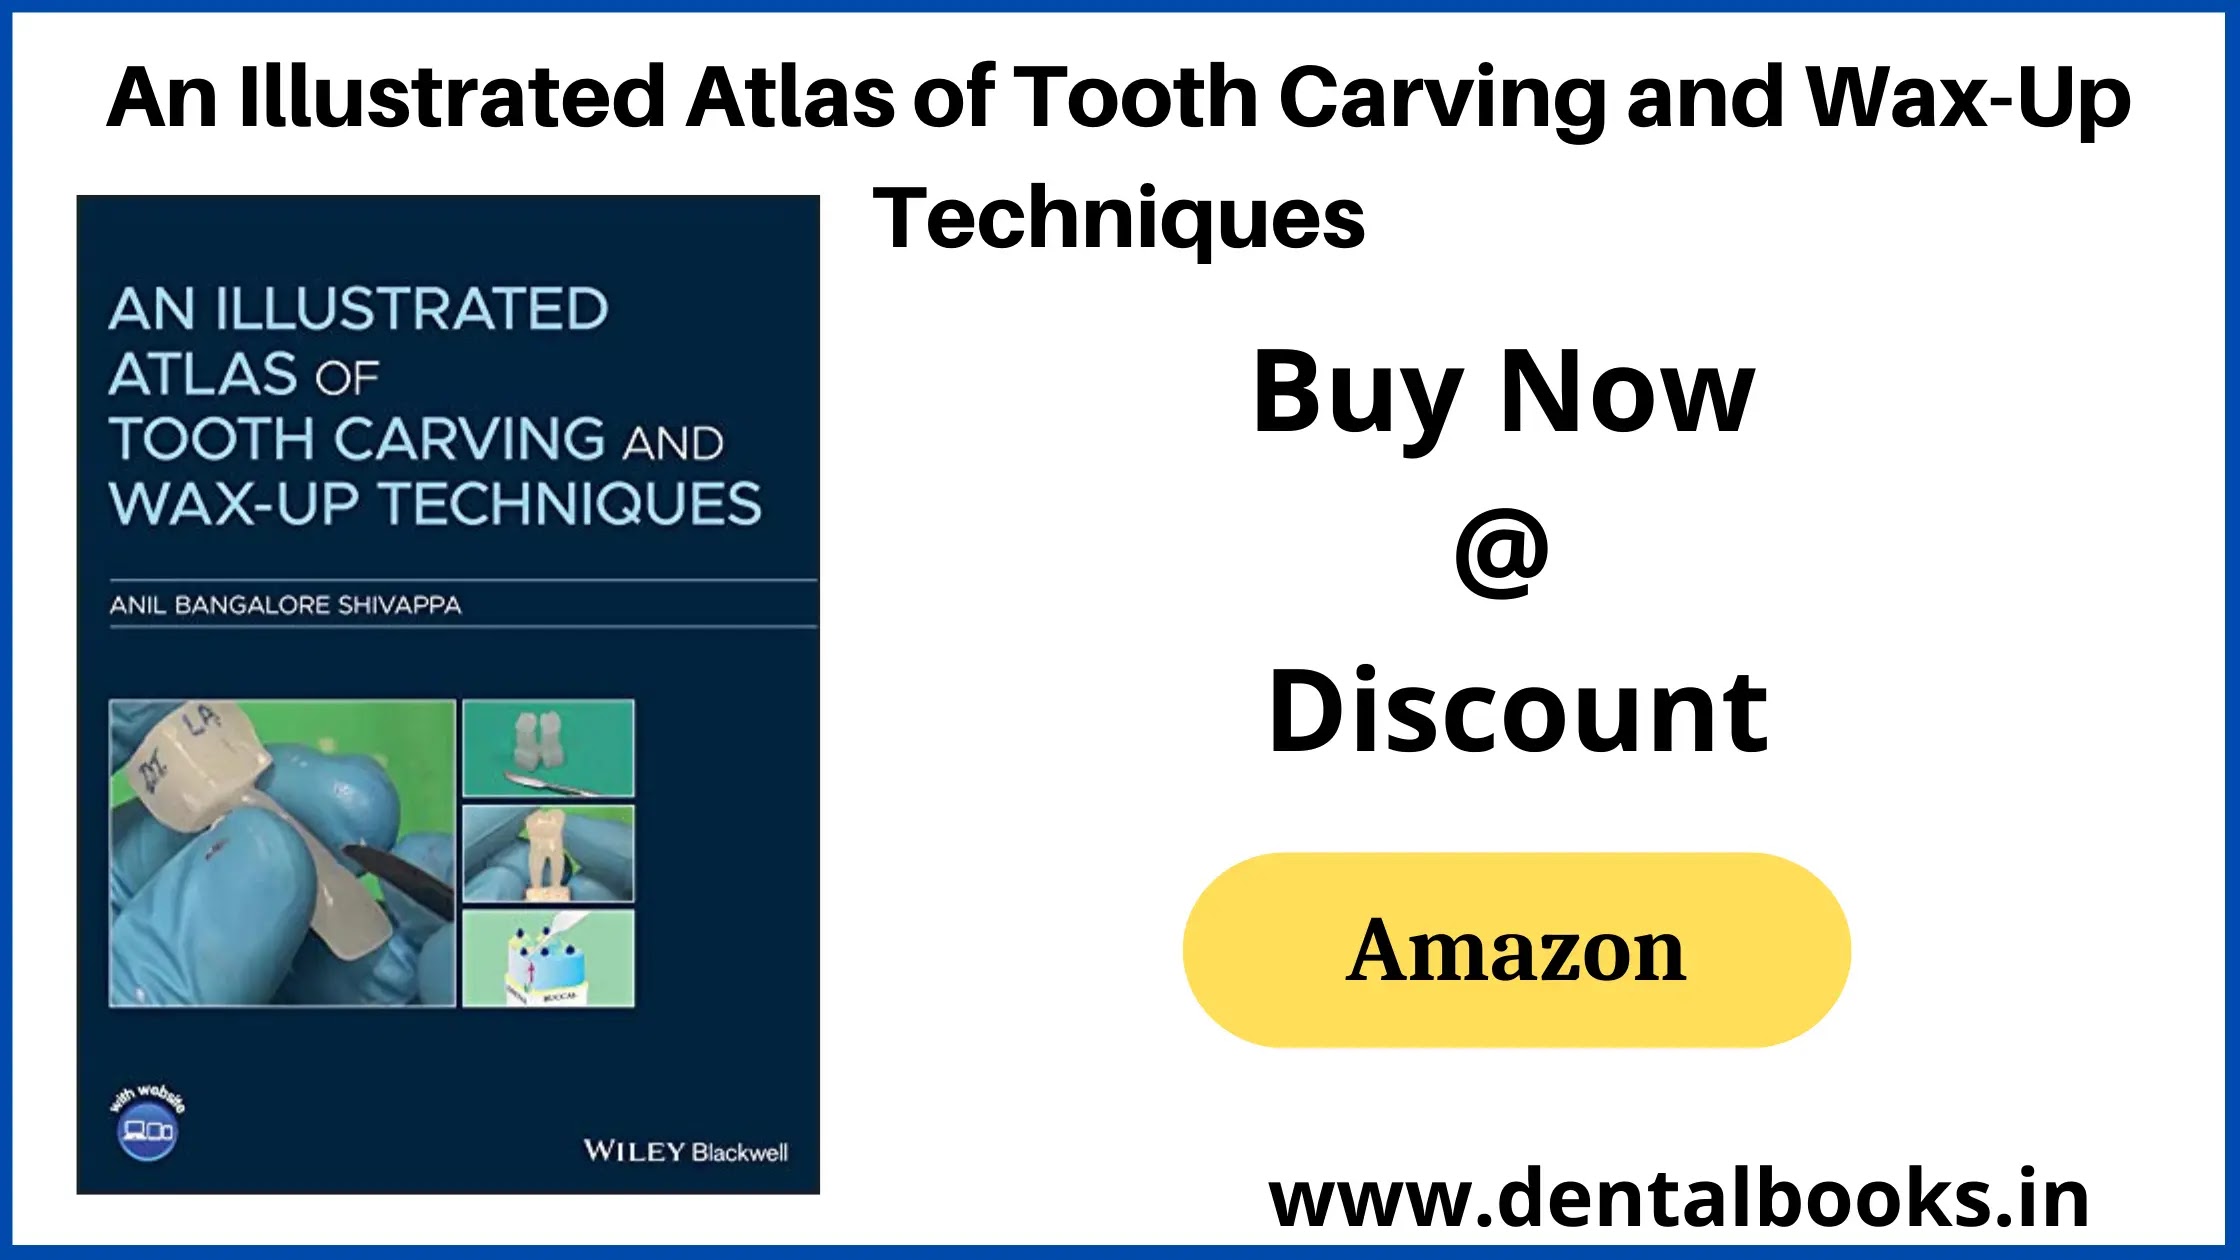 An Illustrated Atlas of Tooth Carving and Wax-Up Techniques PDF